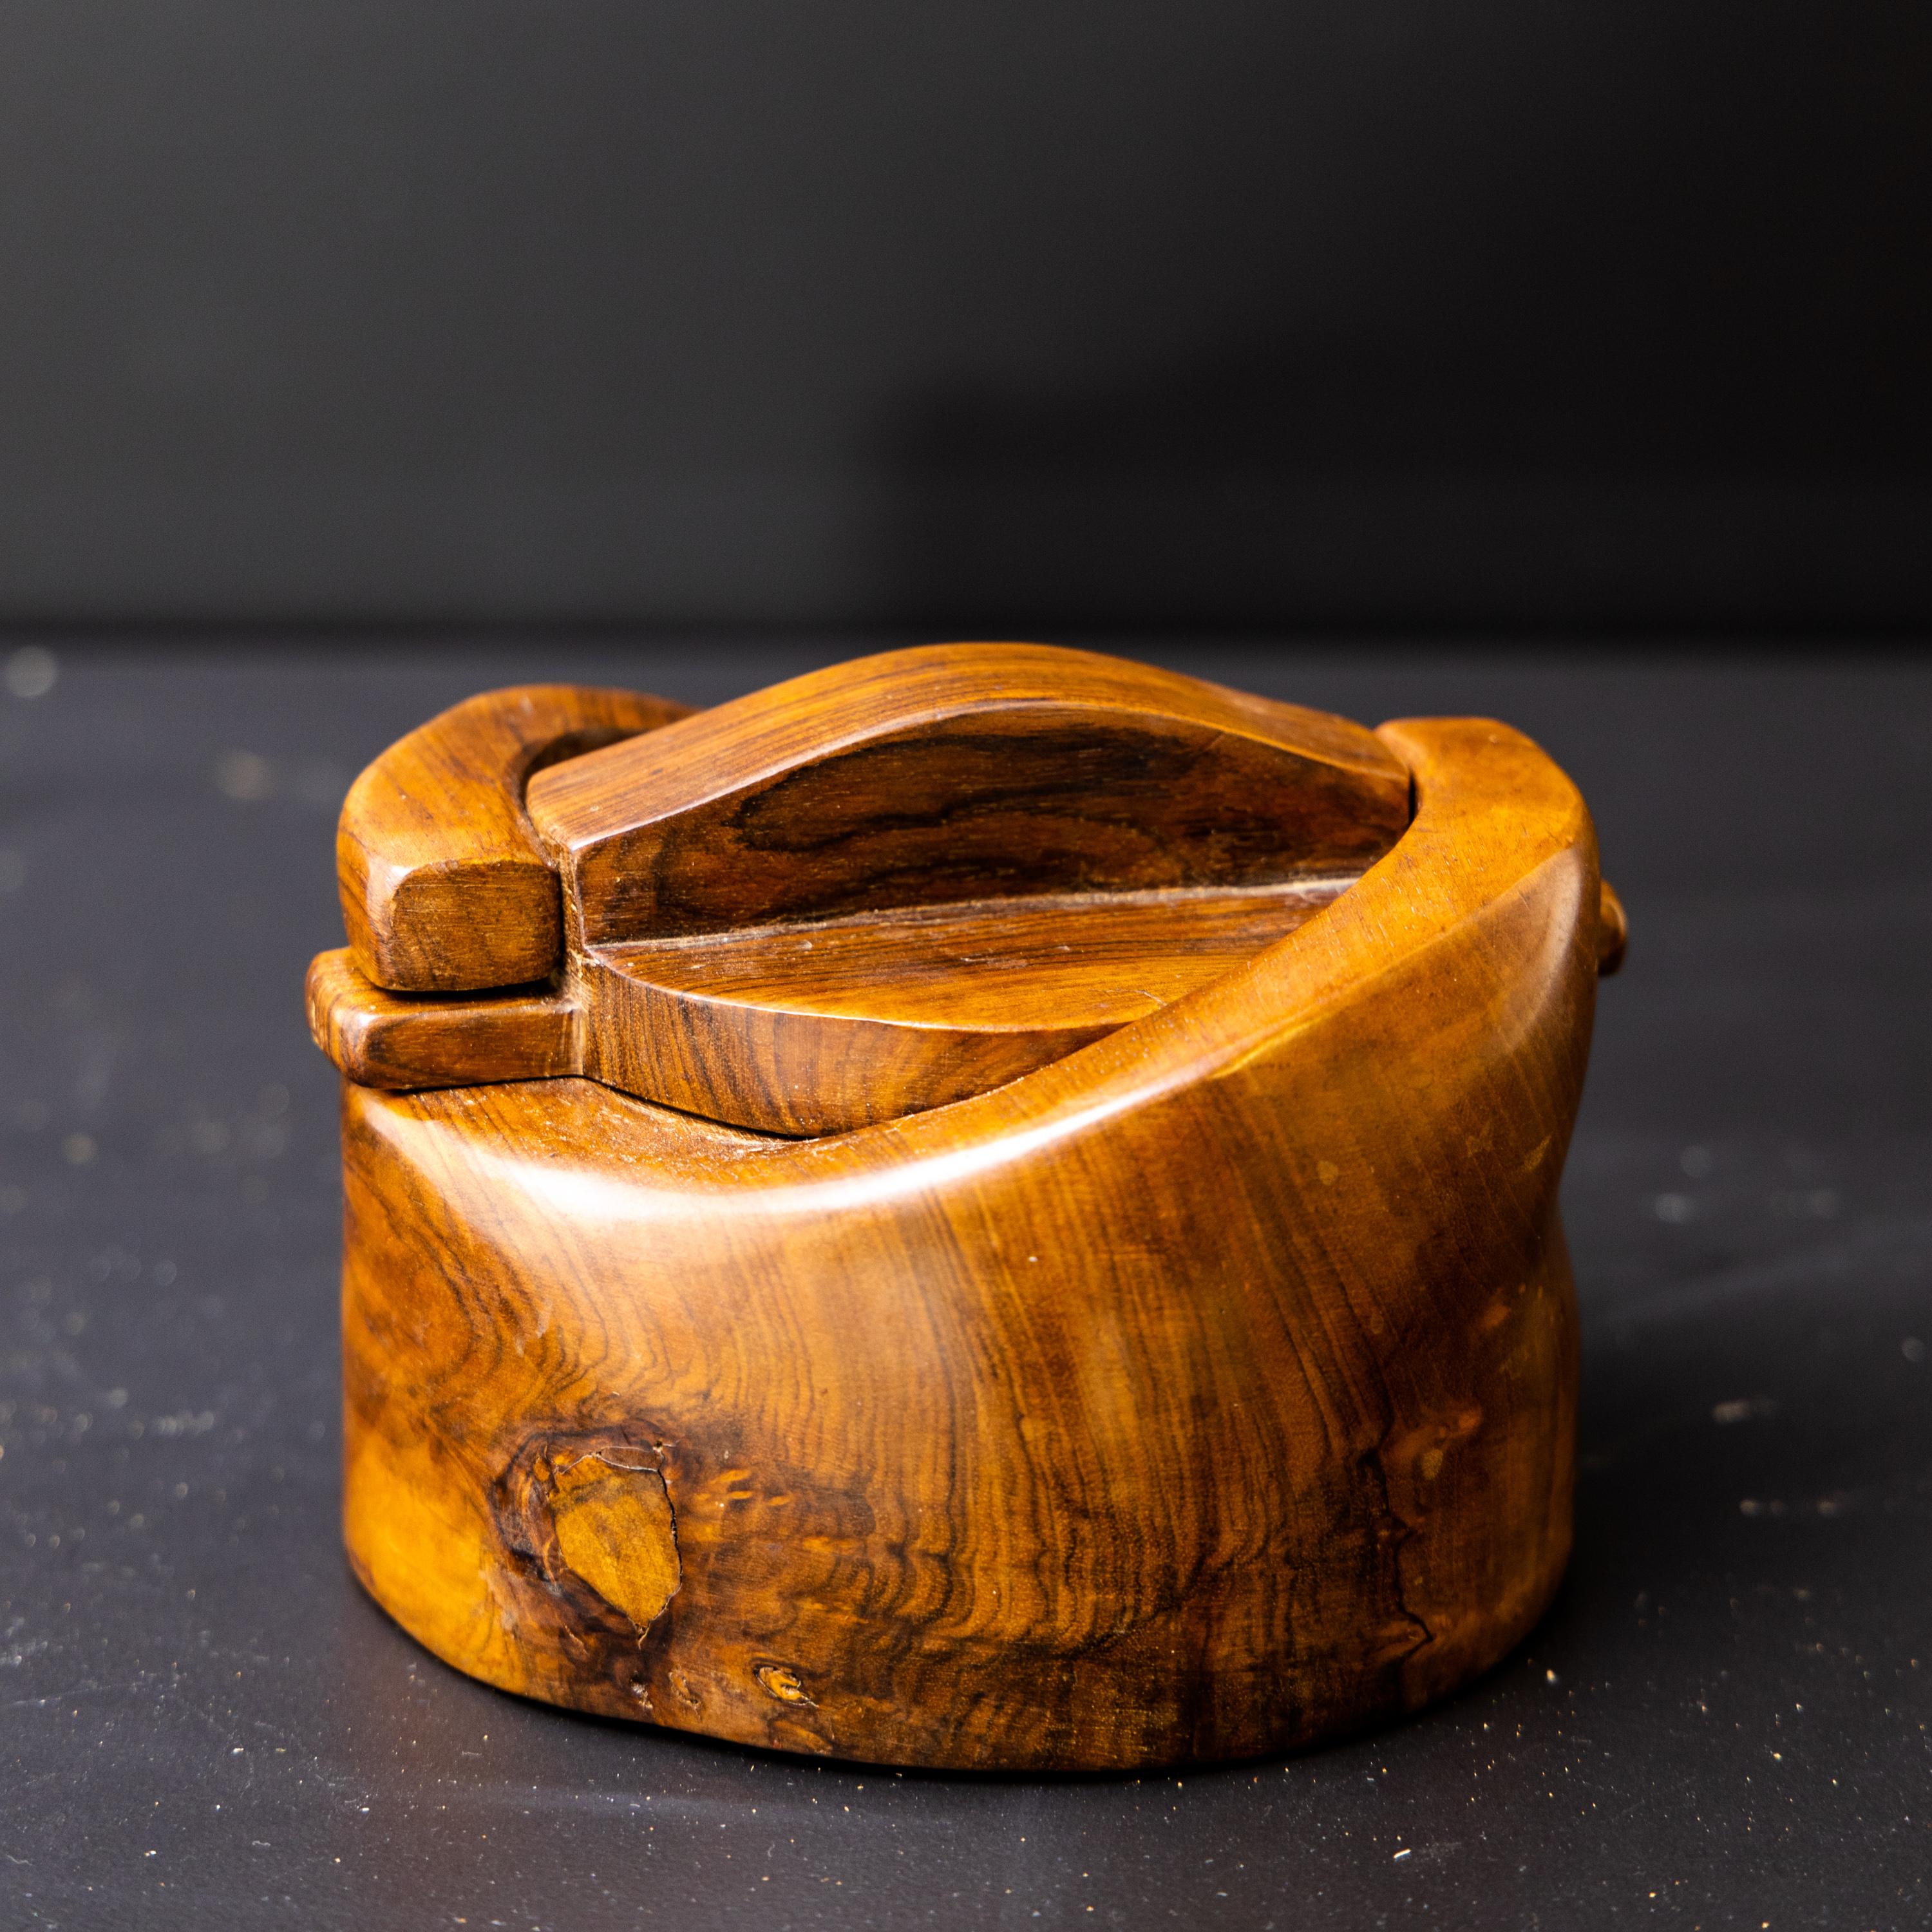 Exquisitely carved lidded box by Alexandre Noll (1890-1970), created around 1950. The walnut wood exhibits a smooth, polished finish, retaining its natural charm. The lid securely fastens with a small twisting movement, showcasing exceptional